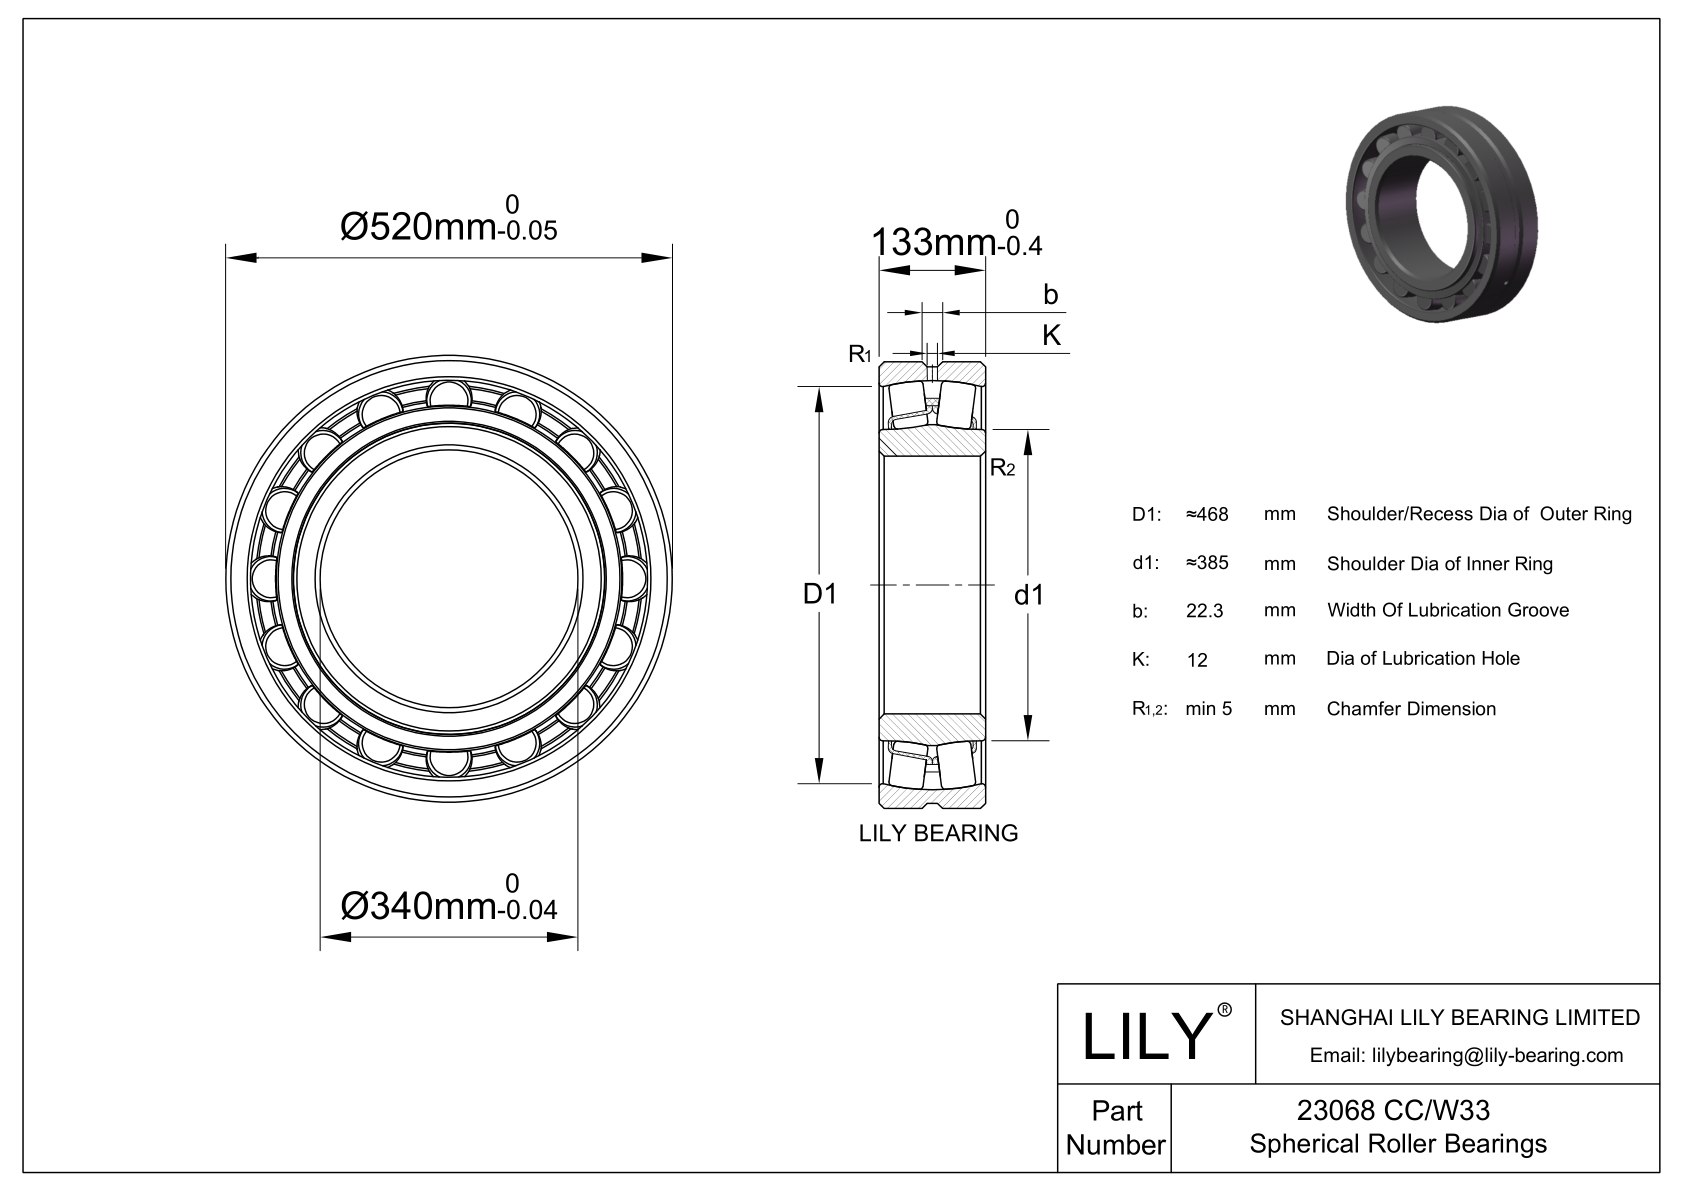 23068 CC/W33 Double Row Spherical Roller Bearing cad drawing